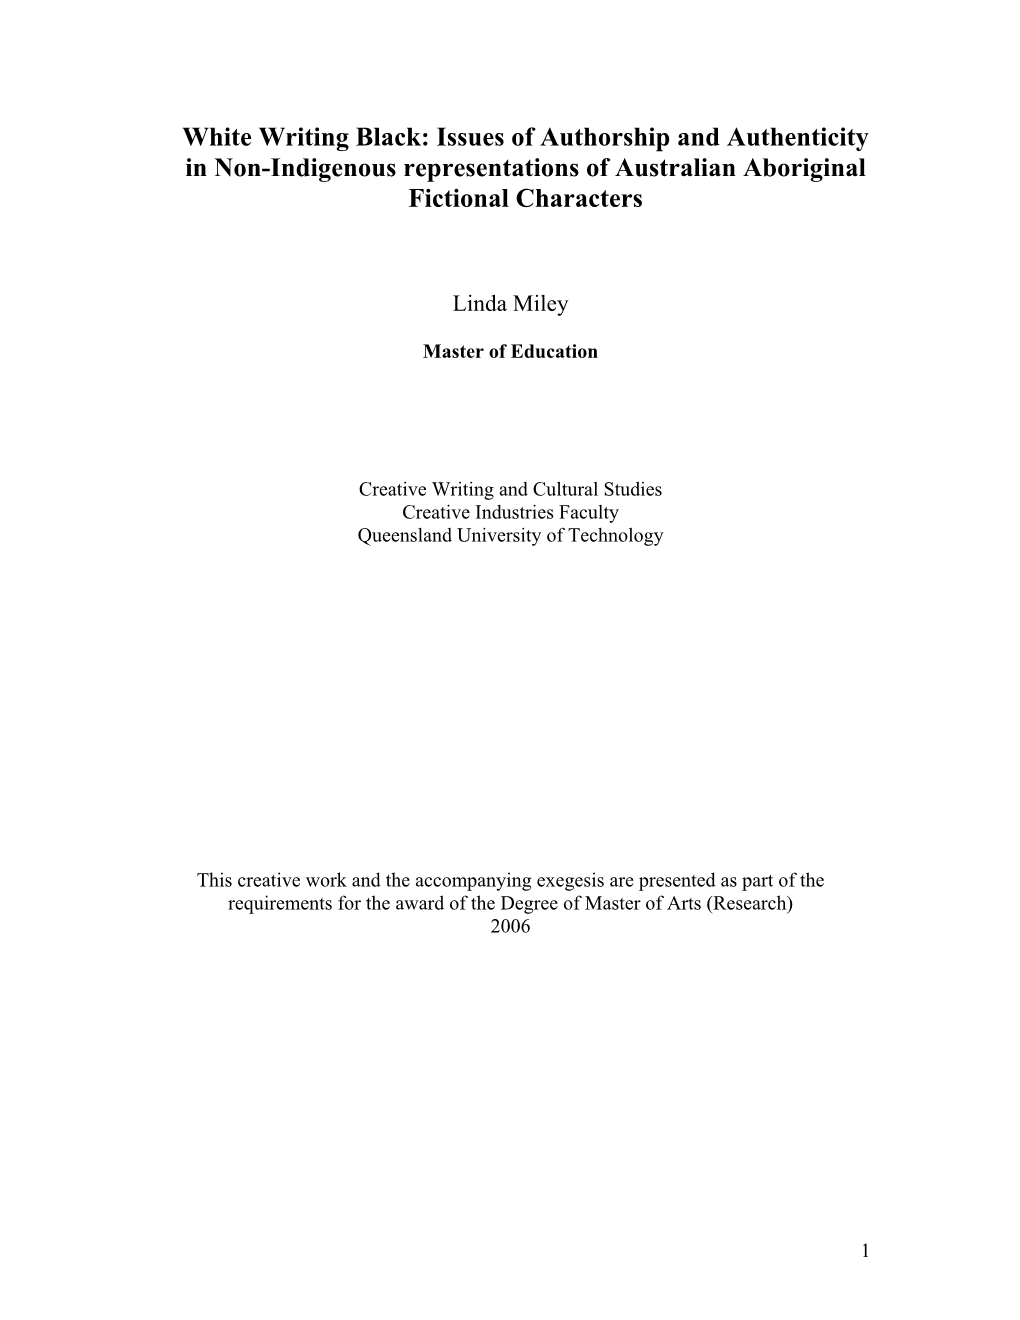 Issues of Authorship and Authenticity in Non-Indigenous Representations of Australian Aboriginal Fictional Characters